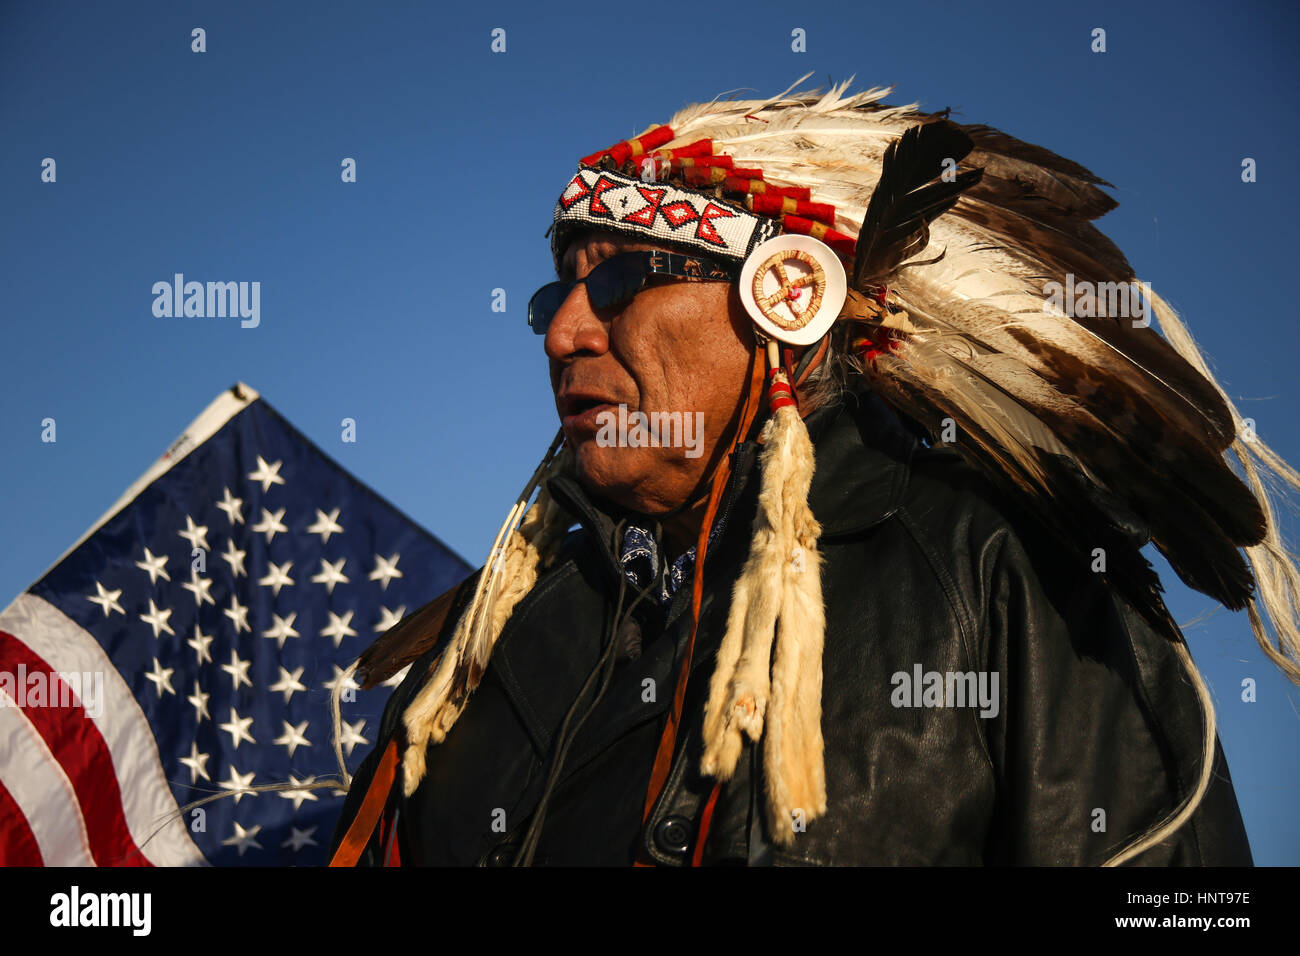 Cannon Ball, North Dakota, USA. 12th Jan, 2017. CHIEF ARVOL LOOKING HORSE speaks to members of the Woodland Cree Tribe at the pipeline protest site located on US Army Corps land. Land managed by the Army Corps of Engineers where the pipeline has been routed is disputed by protestors to be land of the Standing Rock Sioux Tribe as a result of the 1851 Treaty of Fort Laramie. The treaty established Native American territories and interaction between the tribe and the United States, but was not respected by non-Indians. Credit: Joel Angel Juarez/zReportage.com/ZUMA Wire/Alamy Live News Stock Photo